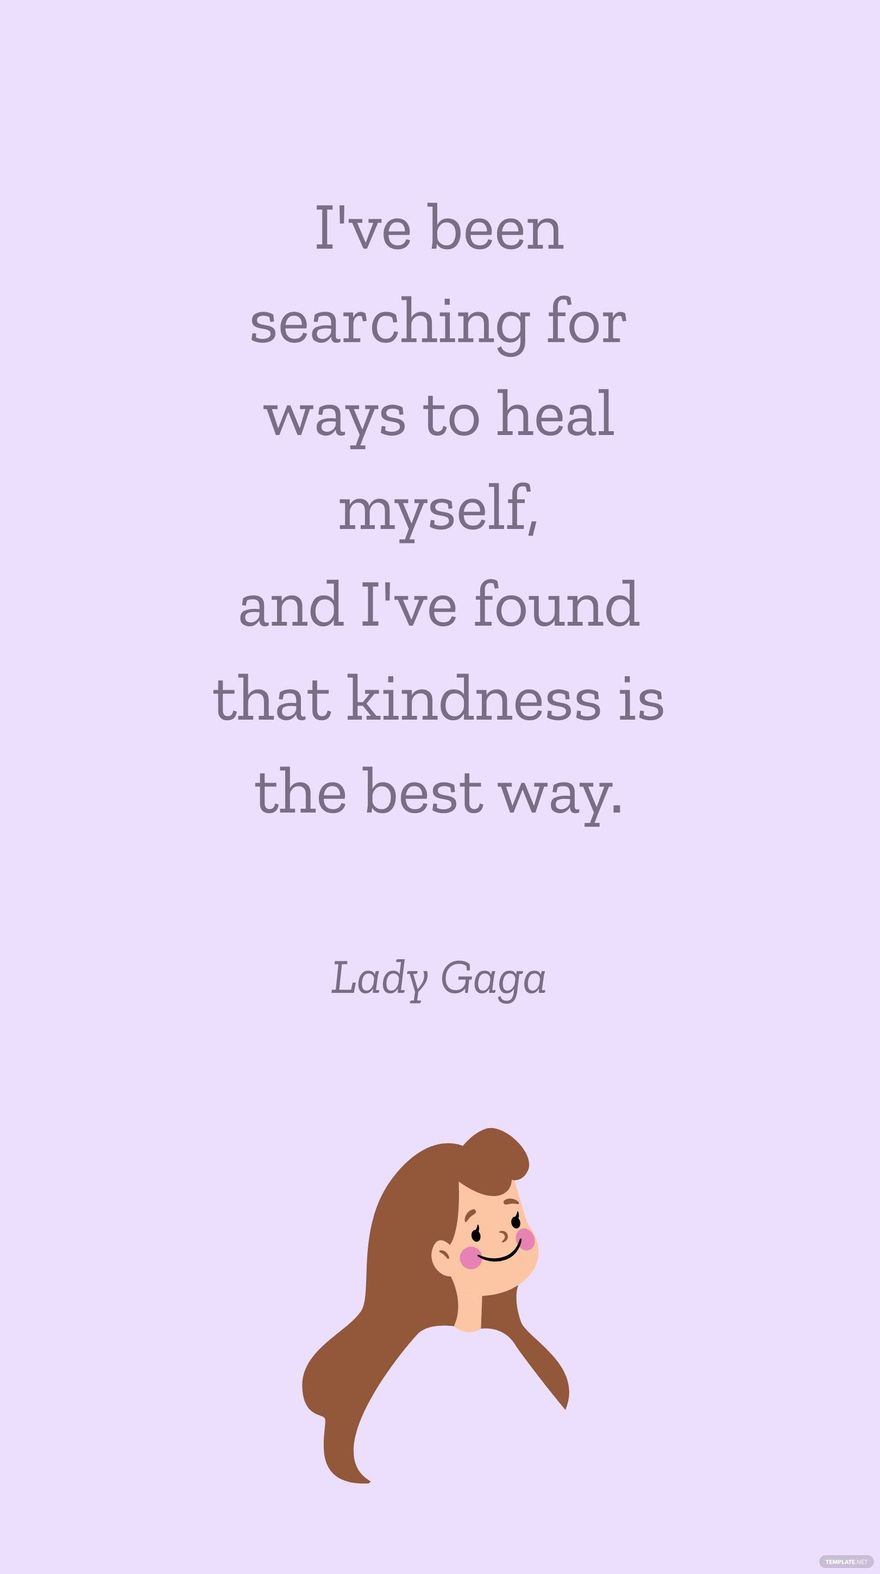 Lady Gaga - I've been searching for ways to heal myself, and I've found that kindness is the best way.